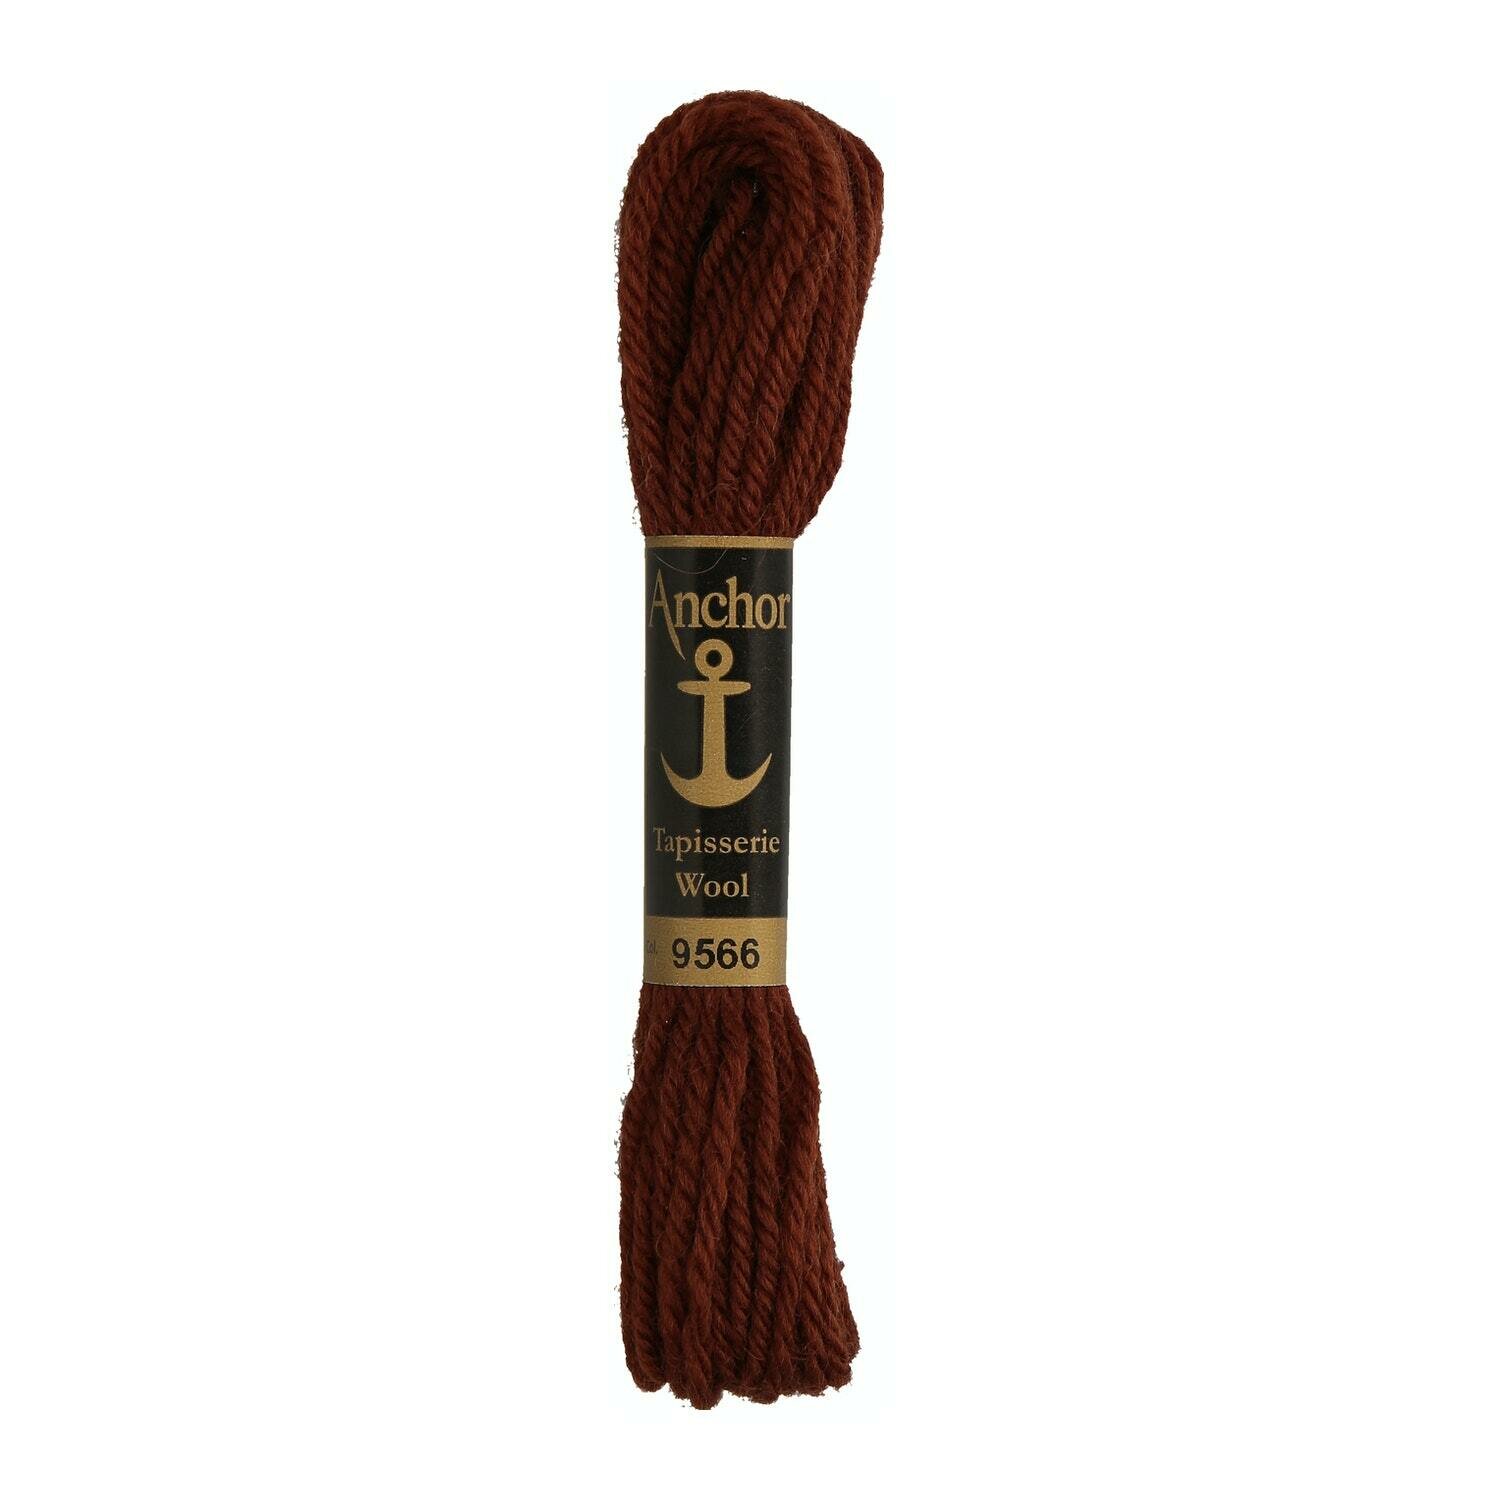 Anchor Tapisserie Wool #  09566